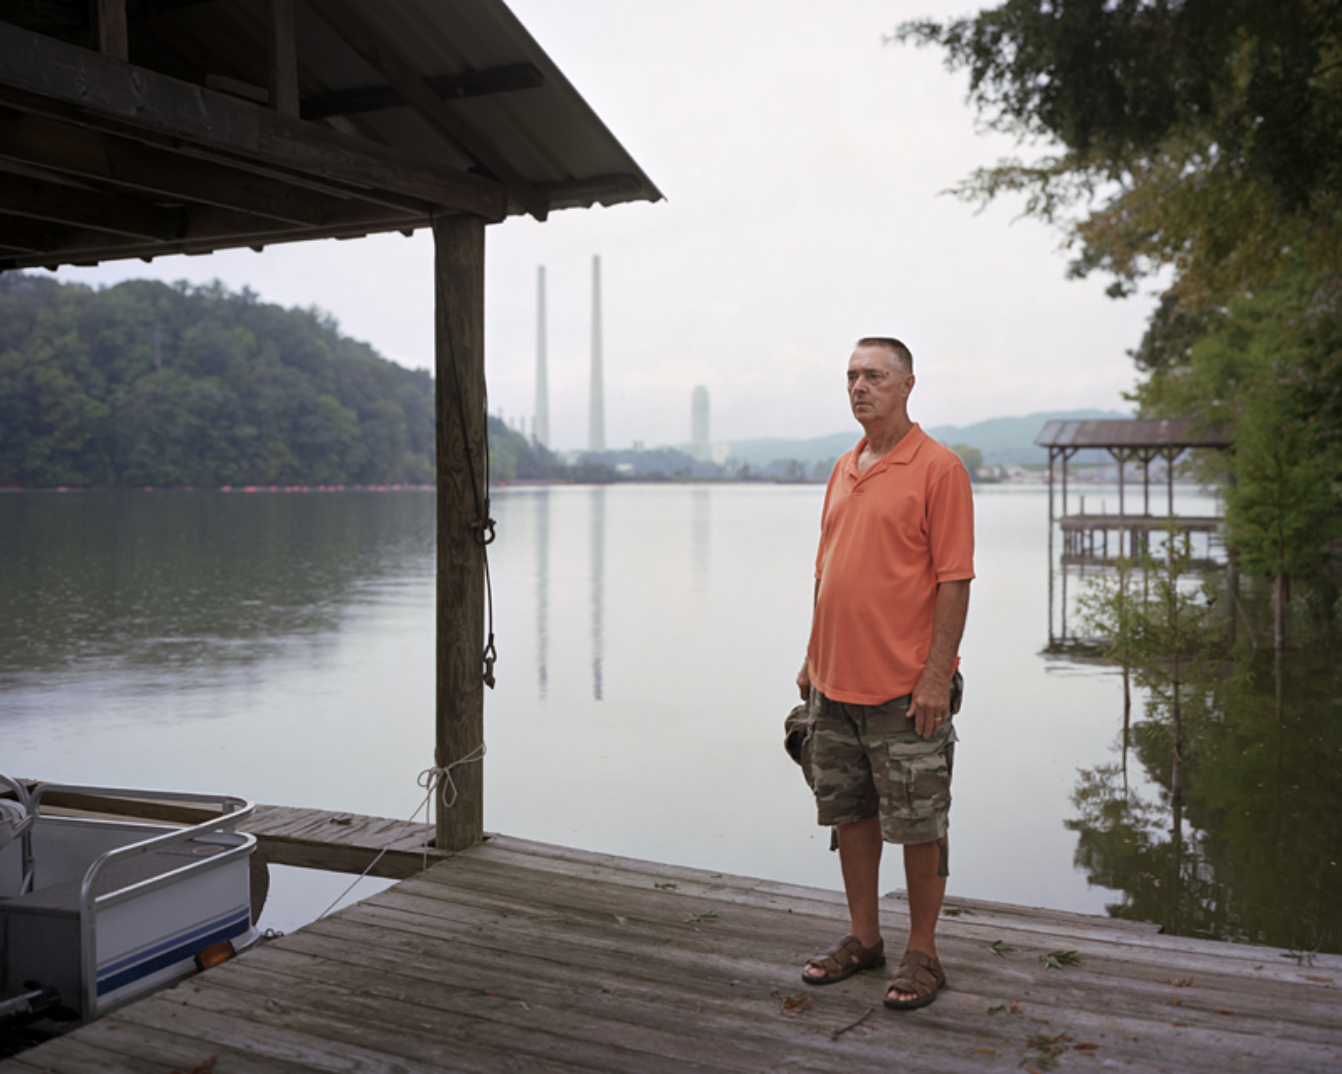   Glenn, Kingston Coal Ash Spill, Clinch River, Tennessee  Image: 2009/printed: 2020 Edition: 1/15 Archival Pigment Print 20 × 25 in. (image size) The Do Good Fund, Inc., 2020-011 